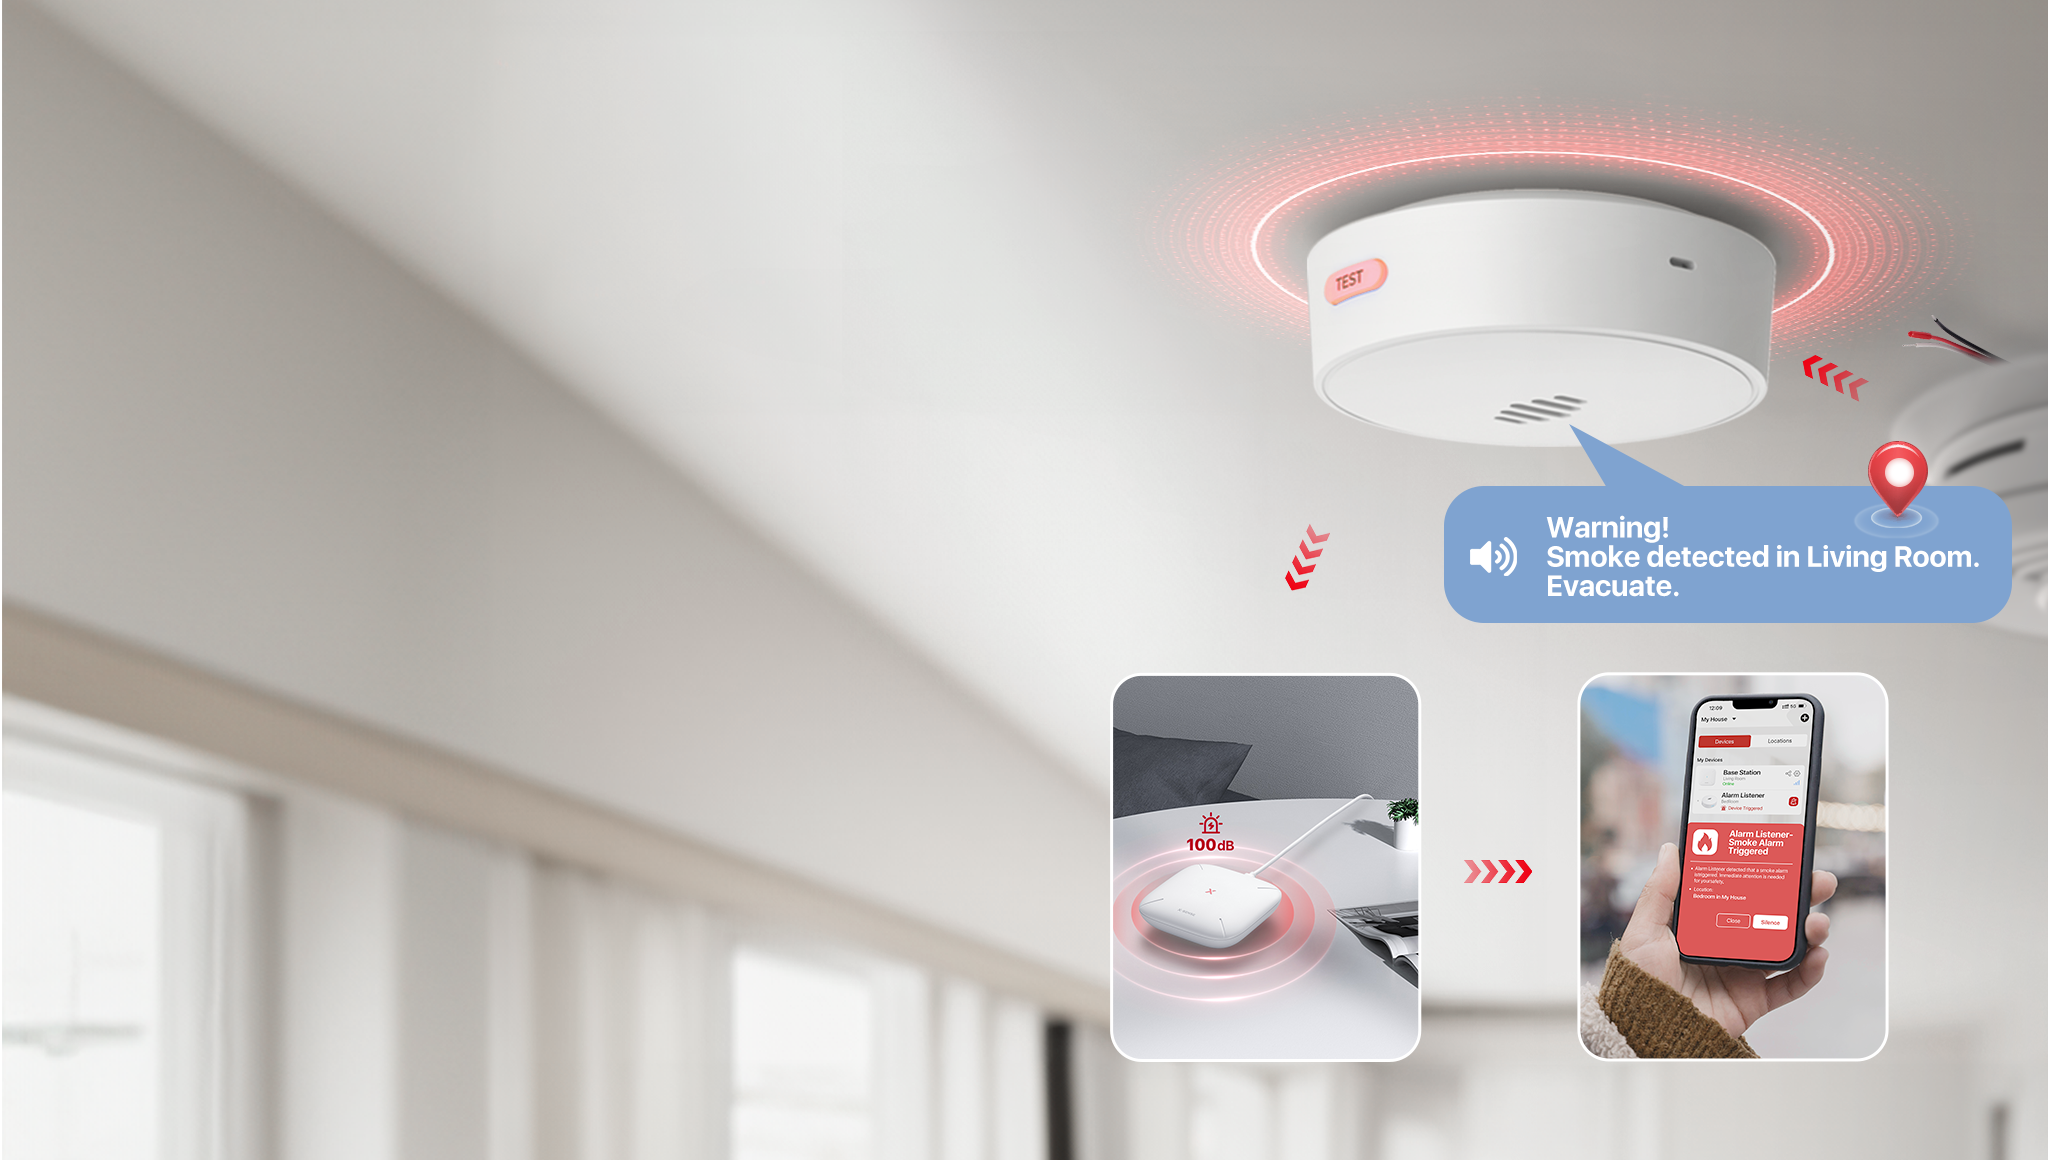 Enable voice alert and APP notification on your dumb hardwire or wireless Smoke&CO alarm with X-Sense Wifi Listener